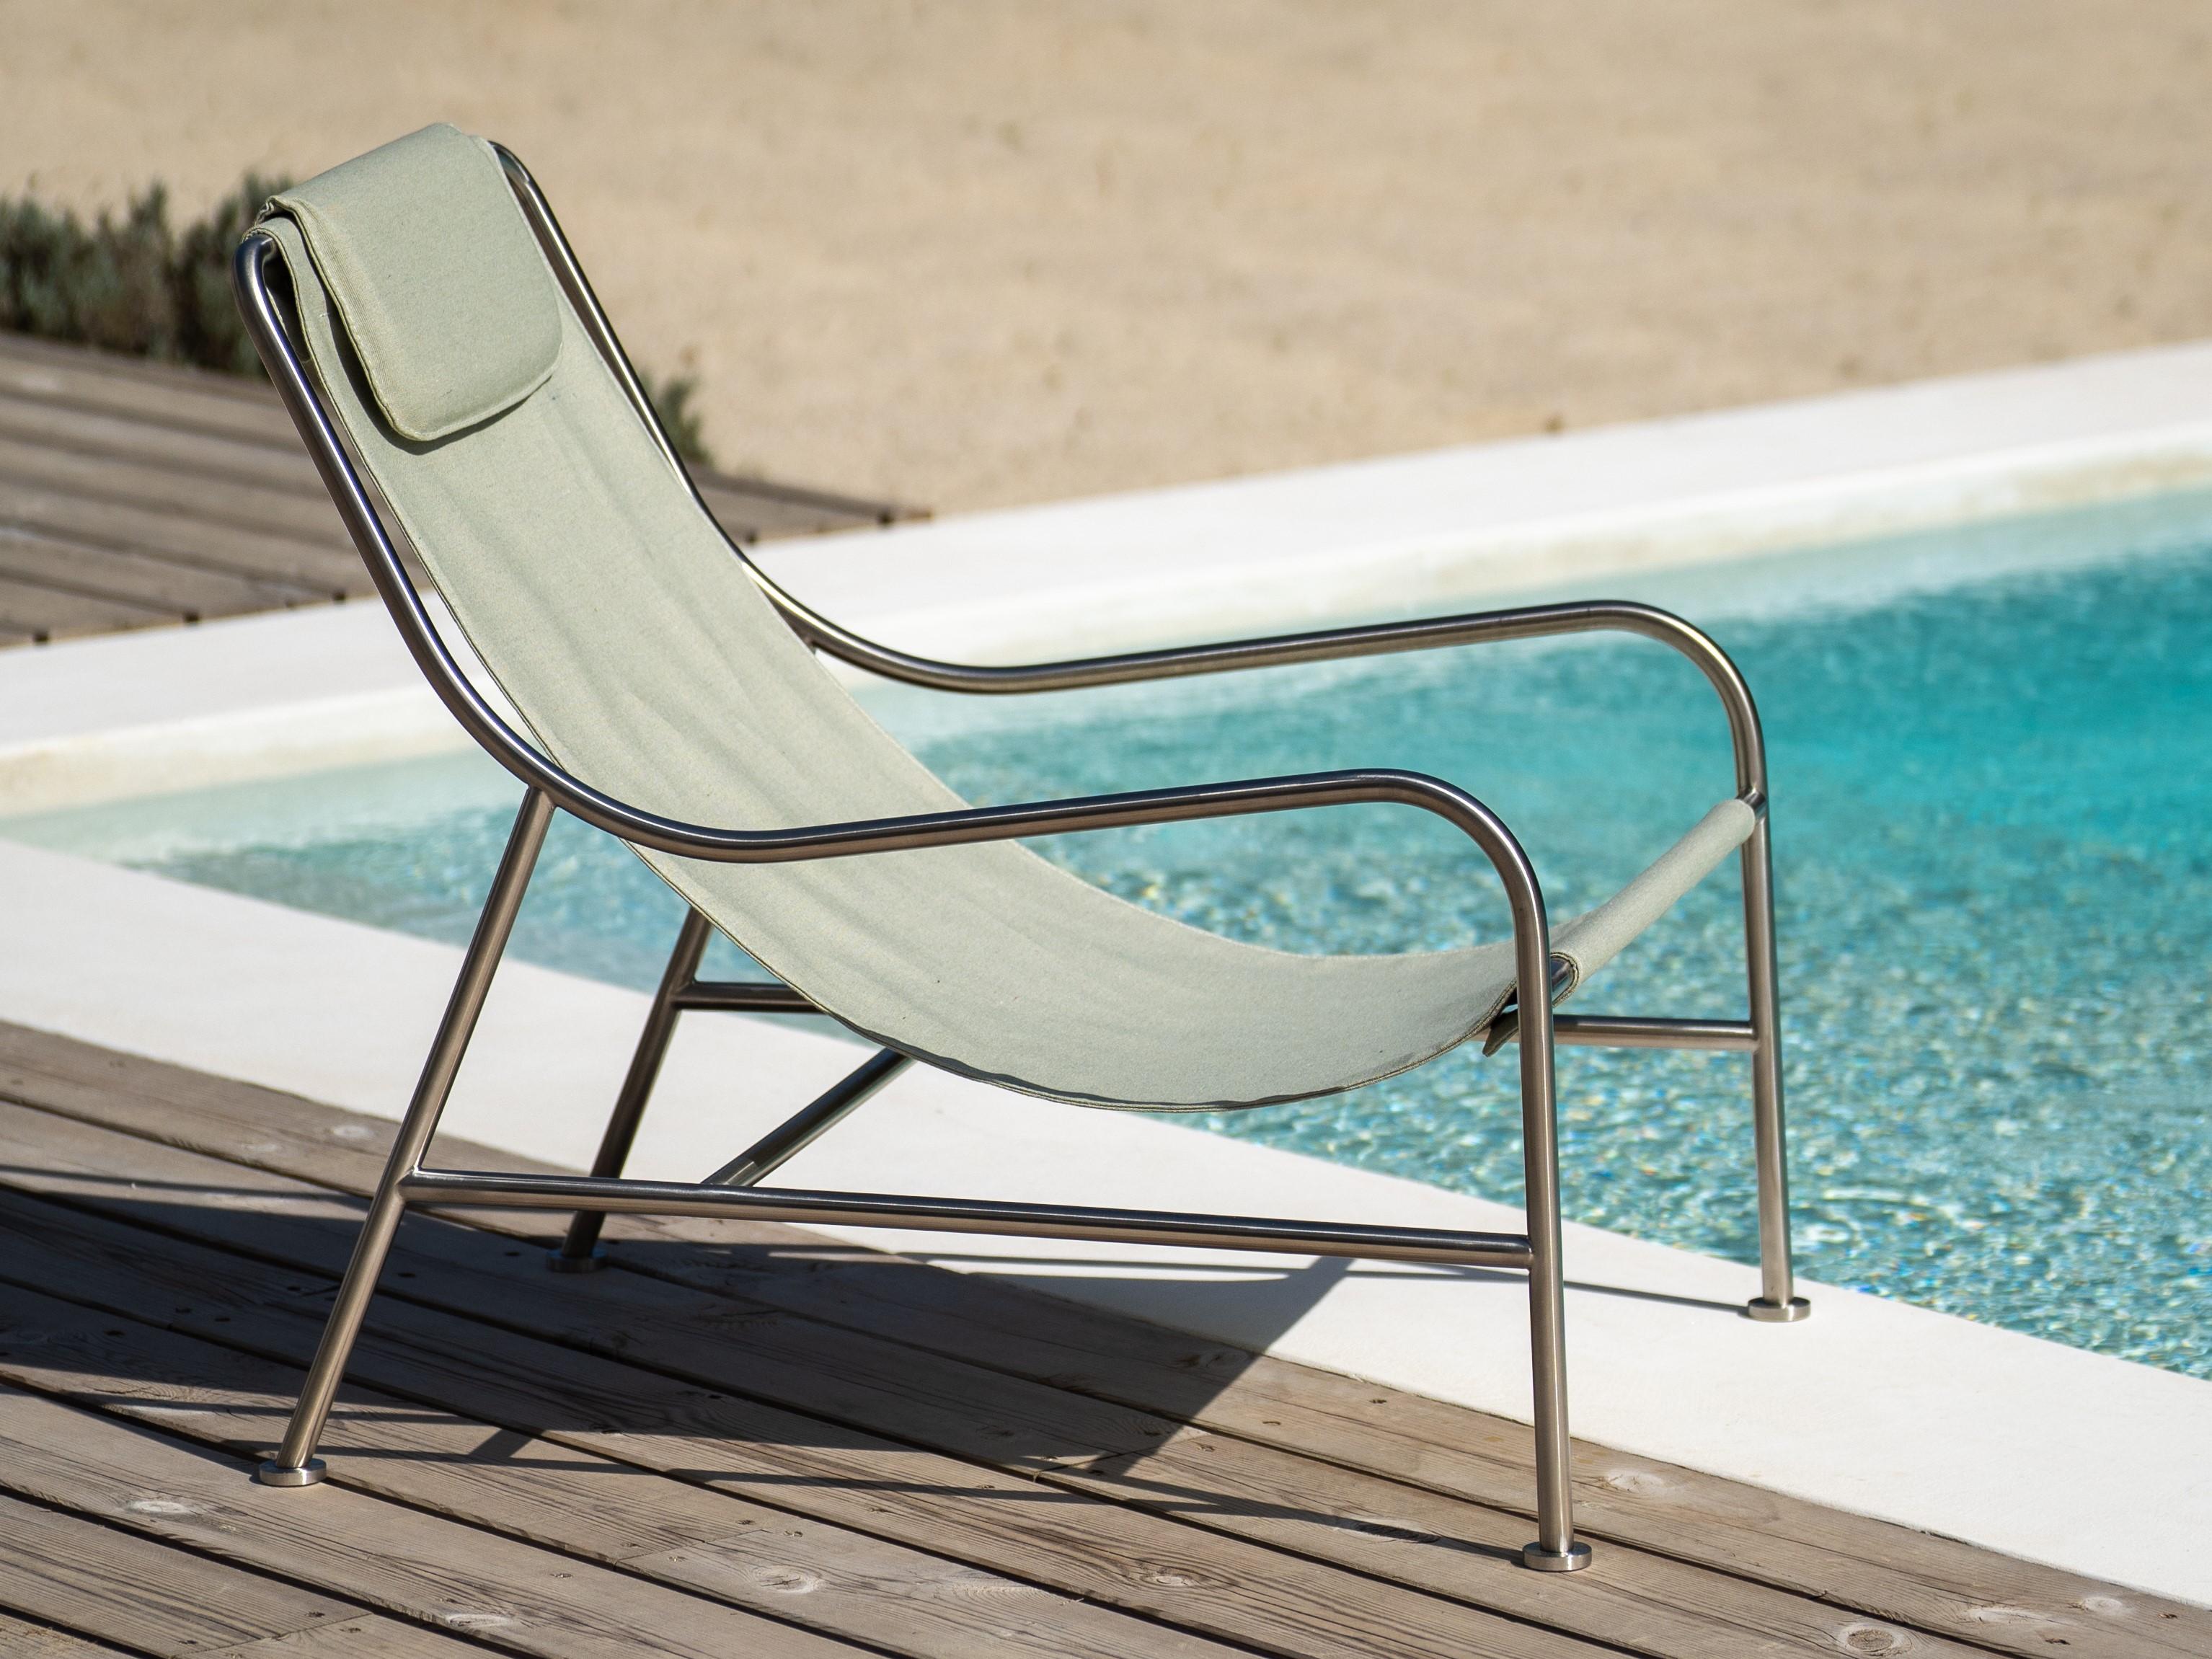 Embracing the purpose to take a break outside, the outdoor version of the LISBOA lounge chair invites you to just sit and relax under the sun, enjoying the long days and warm summer nights. 

Designed to live outdoors, the chair is very light due